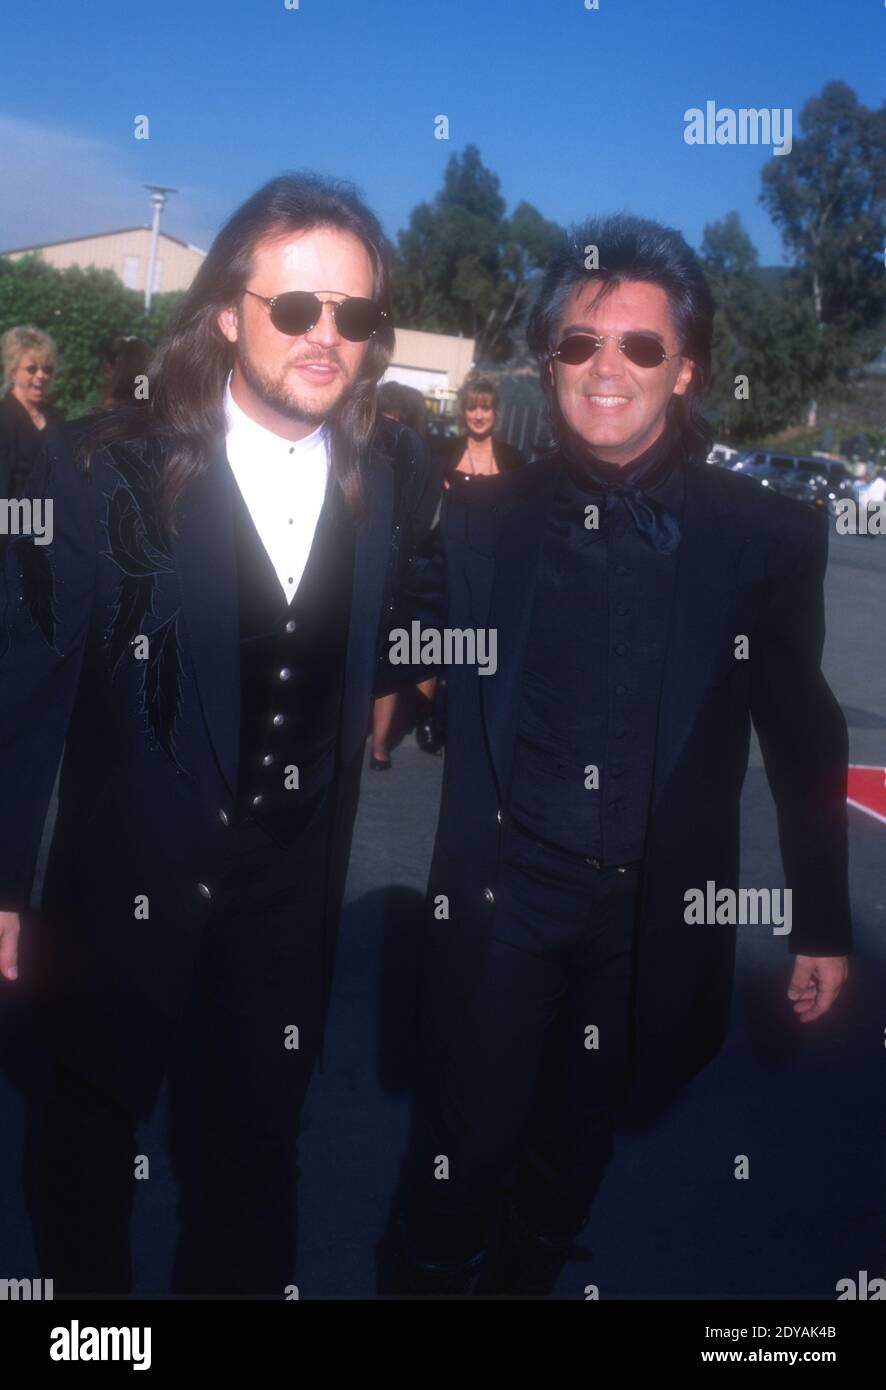 Universal City, California, USA 24th April 1996 Singer Travis Tritt and singer Marty Stuart attend 31st Annual Academy of Country Music Awards at Gibson Amphitheatre on April 24, 1996 in Universal City, California, USA. Photo by Barry King Stock Photo